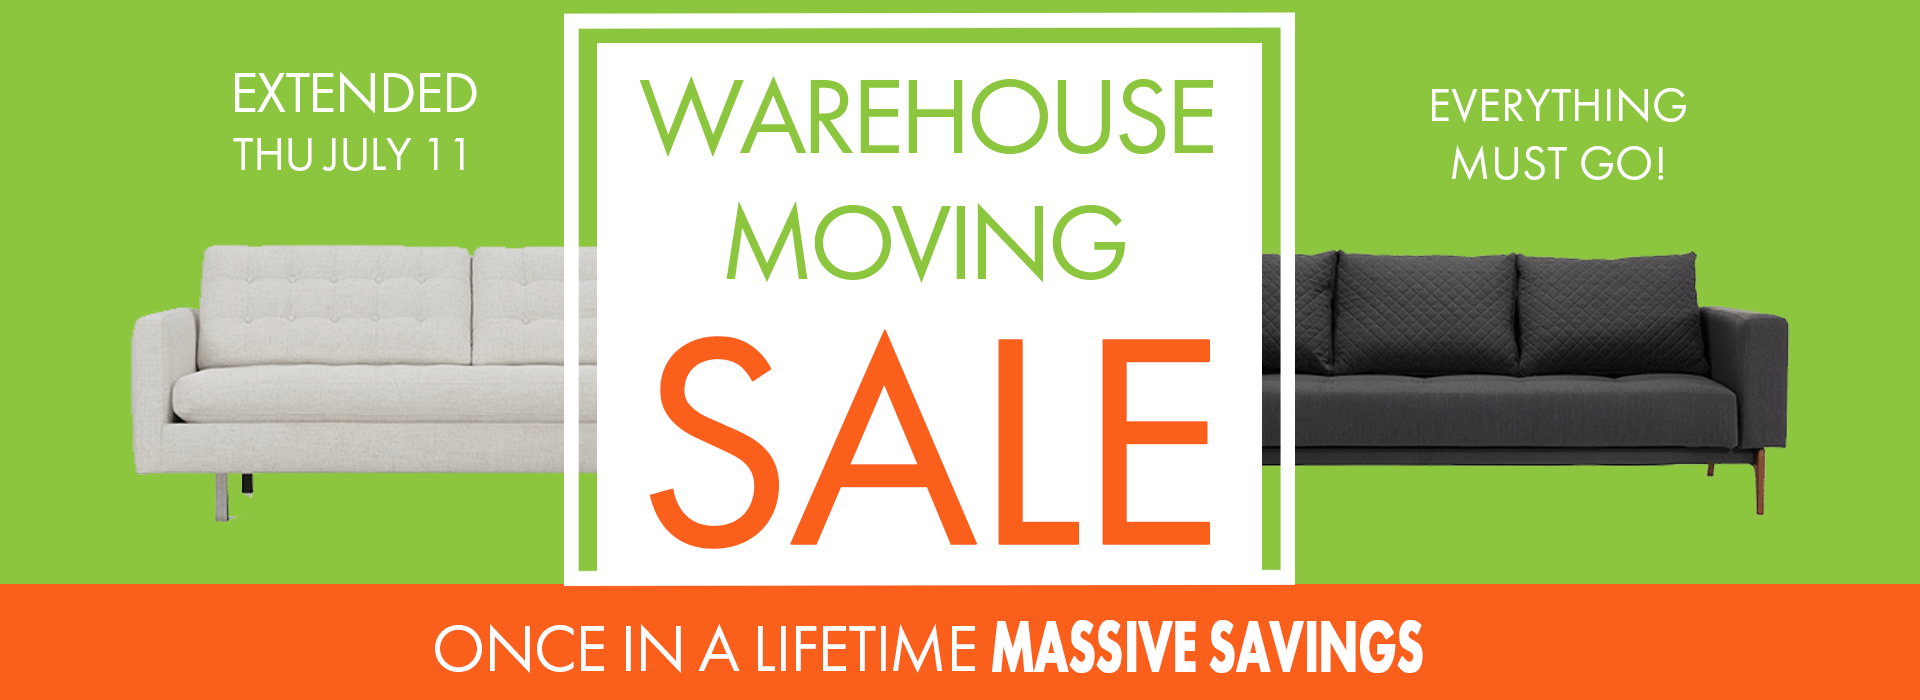 Extended through Thursday July 11th Warehouse Moving Sale with massive savings on new, open box, discontinued and slightly damaged furniture; everything must go!